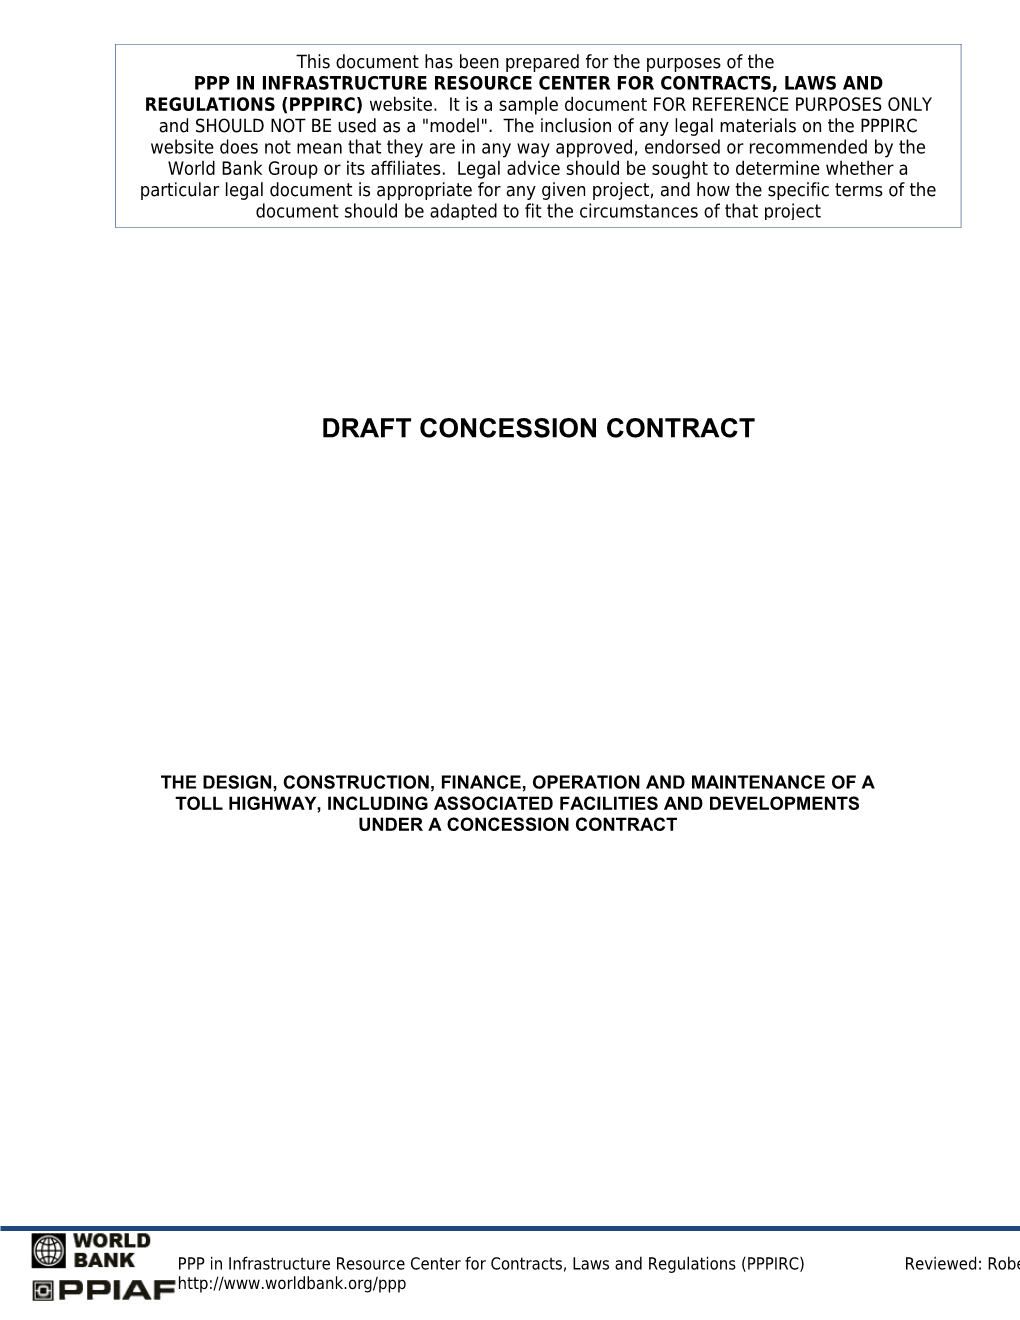 Draft Concession Contract